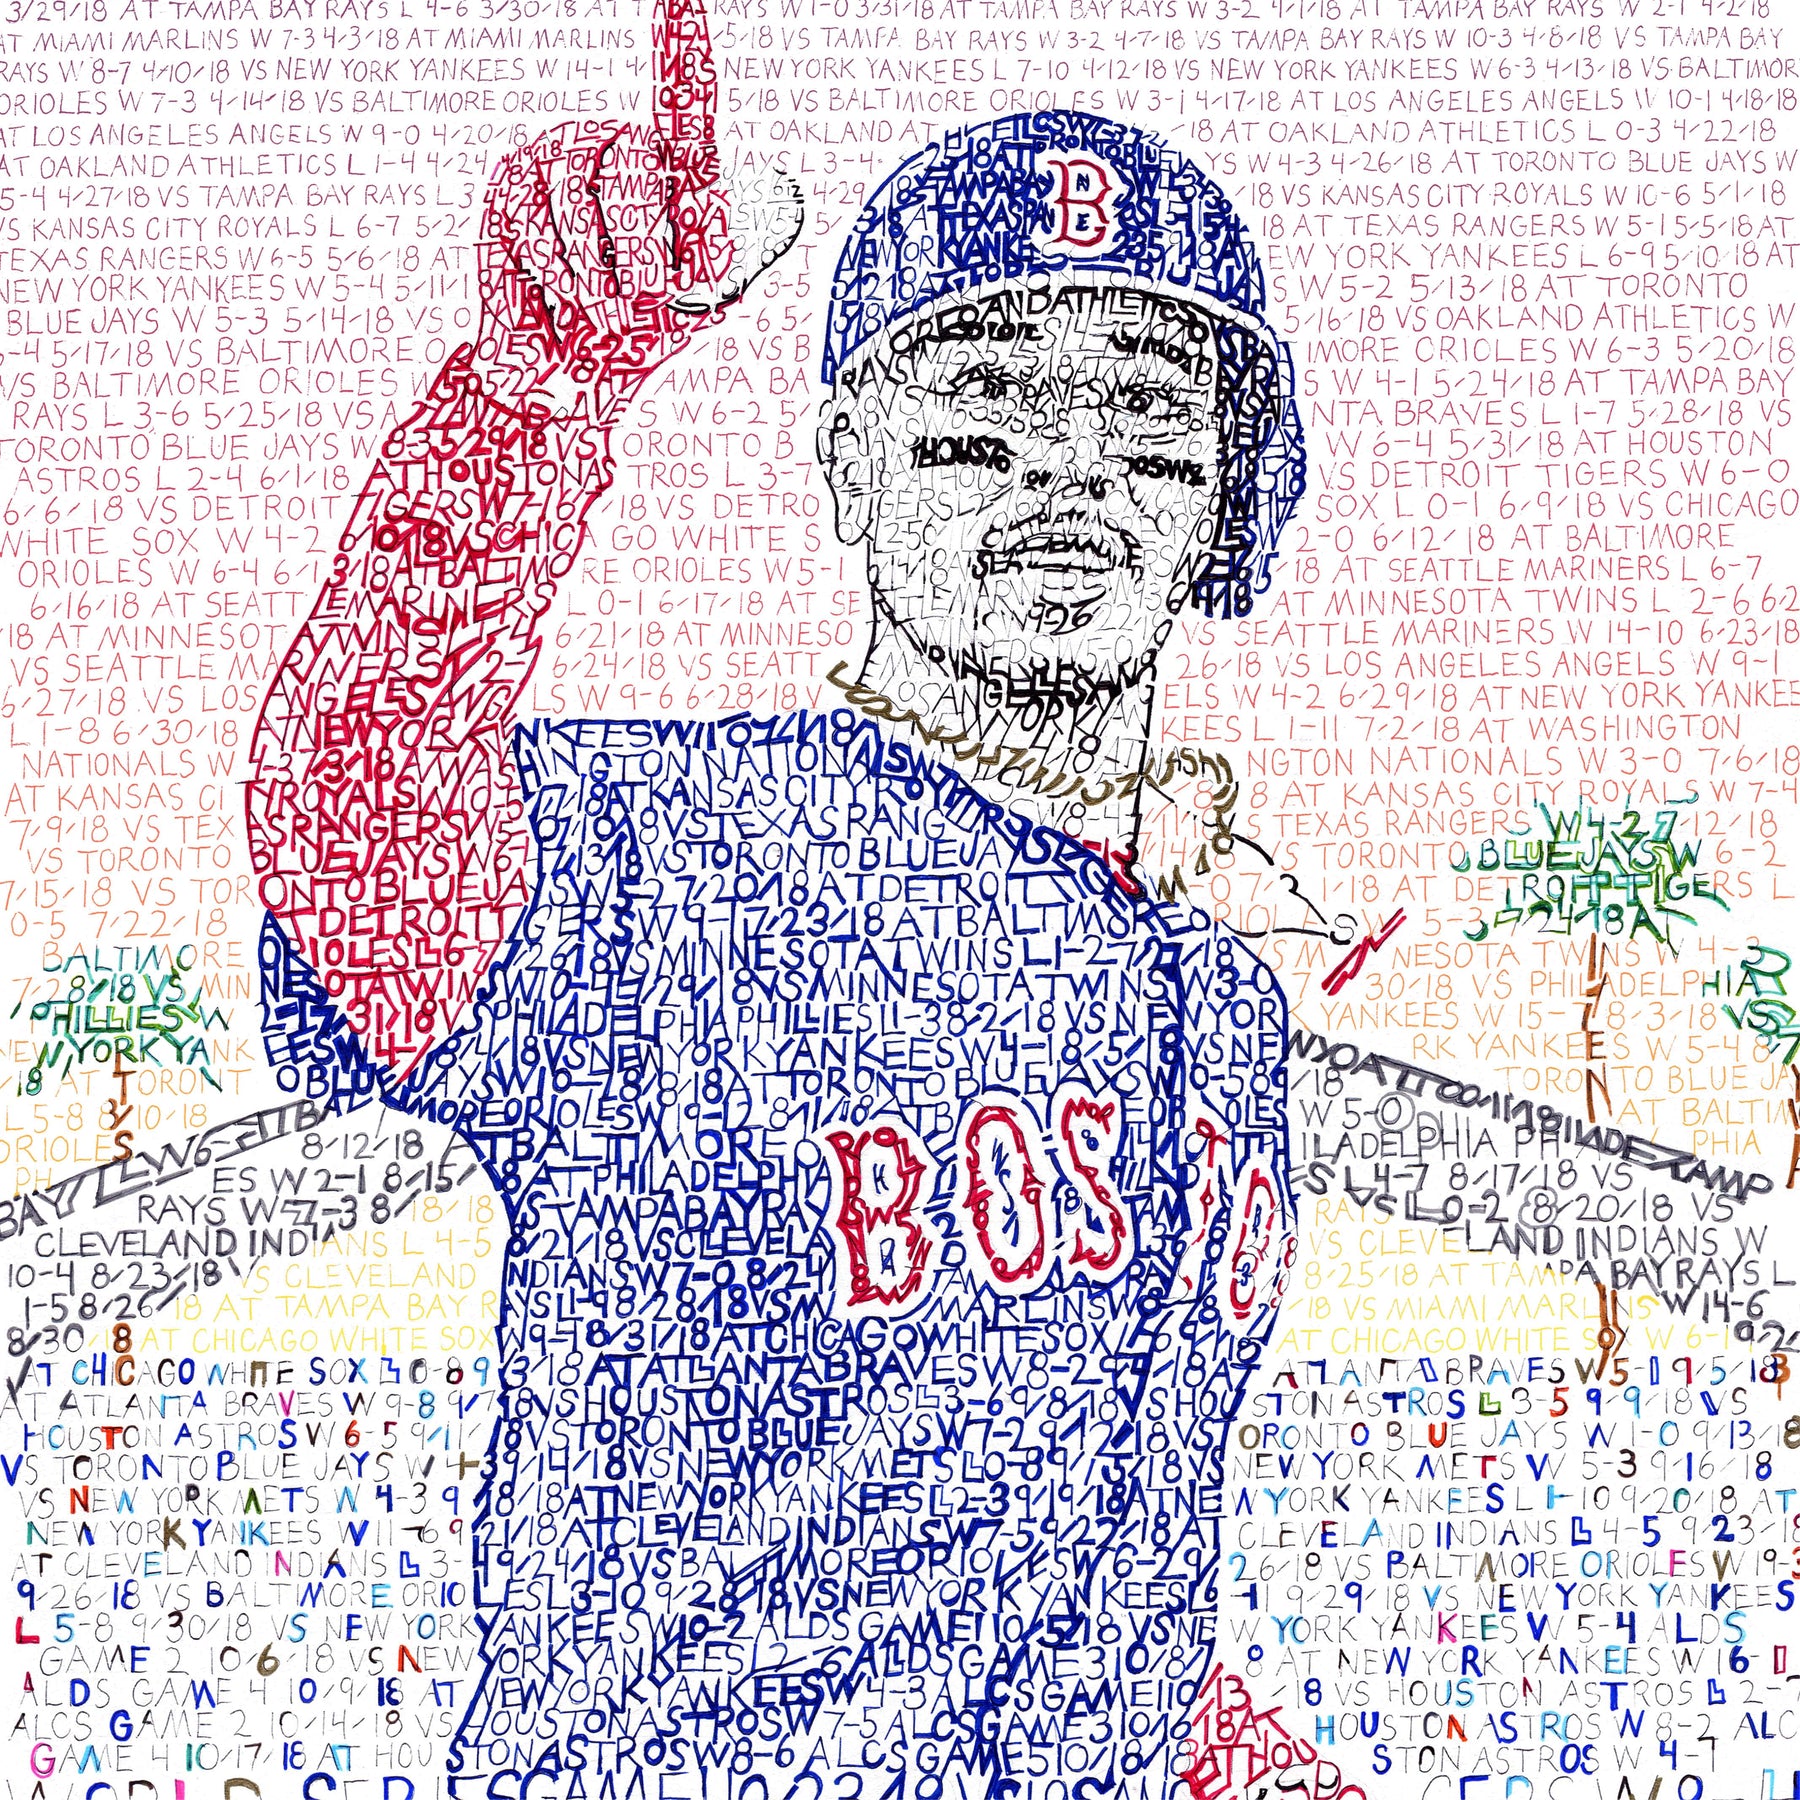 2018 World Series Gifts, Red Sox Art